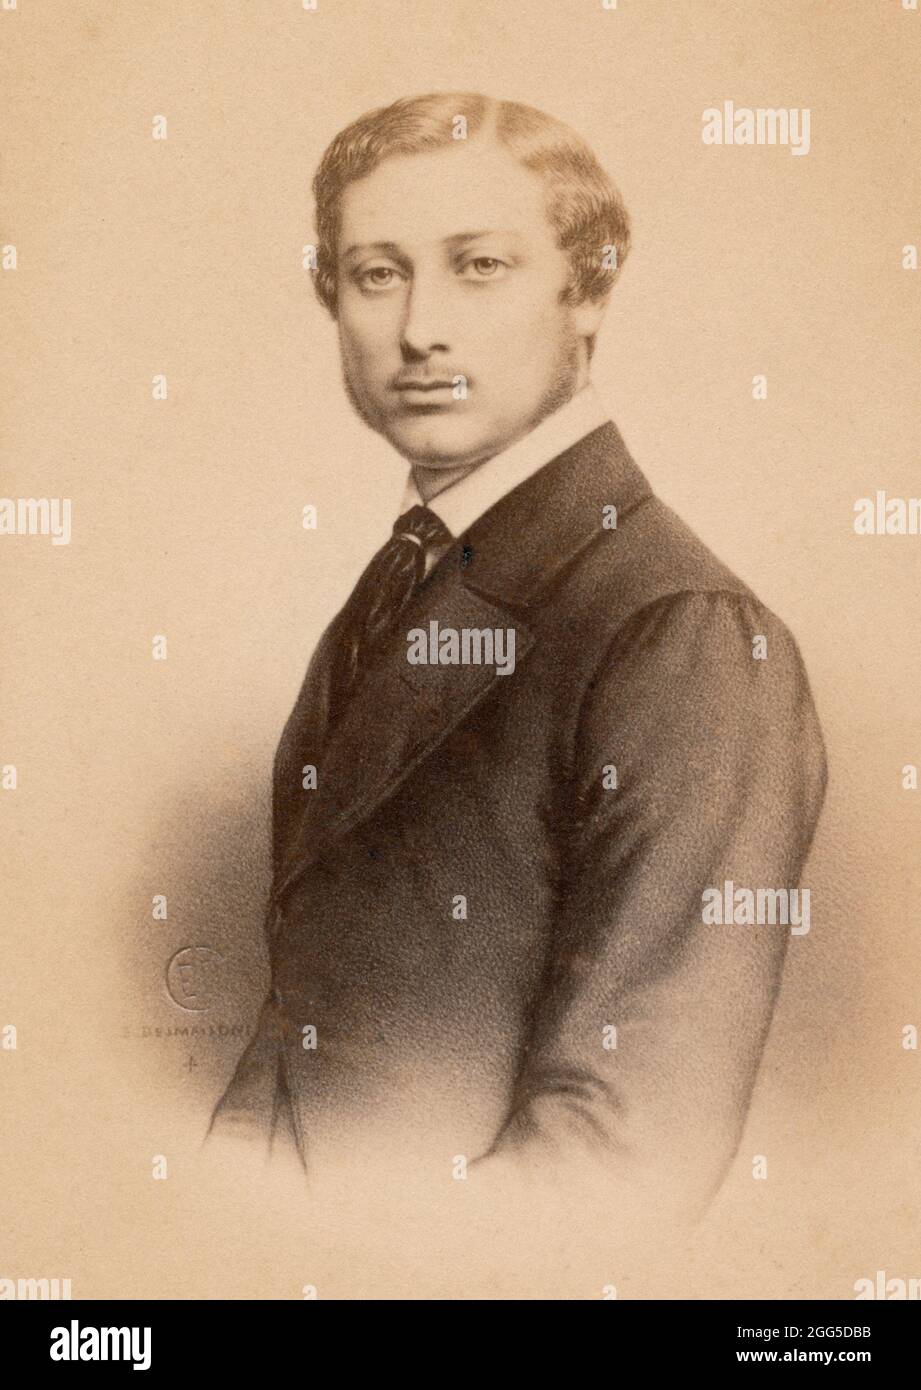 Edward Prince of Wales in c. 1861-5 (later King Edward VII) by E. Demaisons of Paris, officially released in England Stock Photo